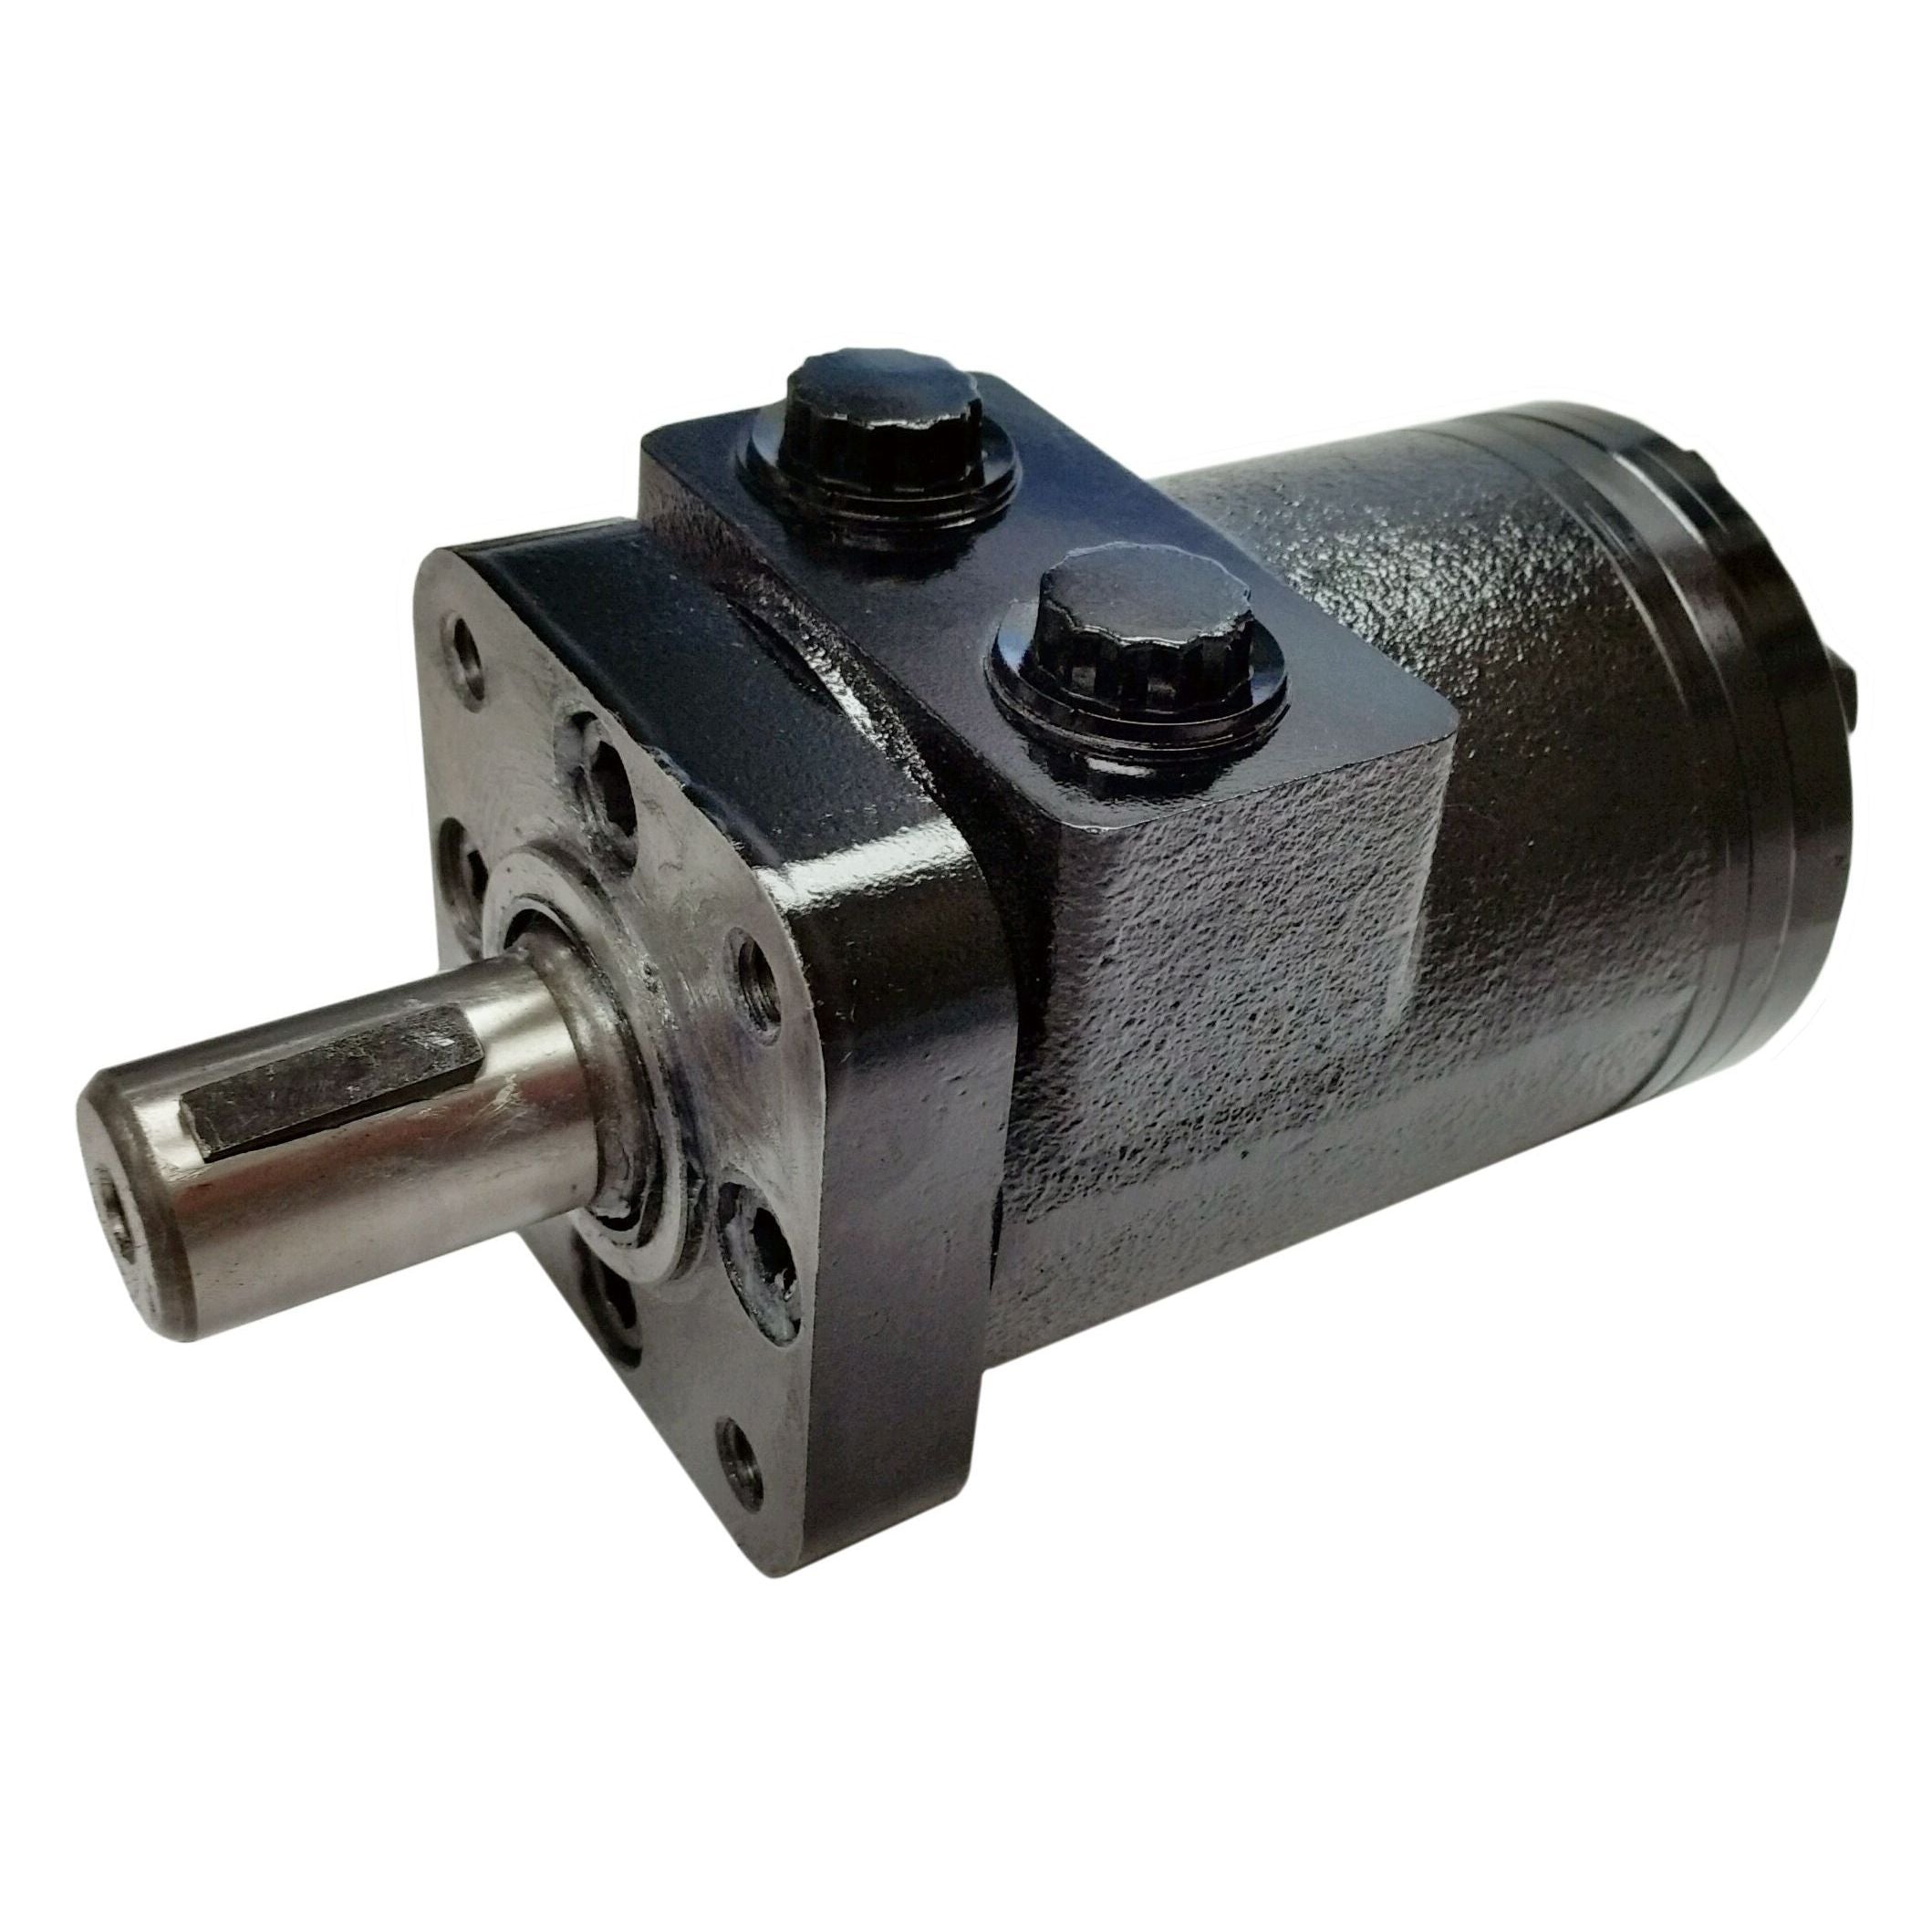 BMPH-160-H4-K-P : Dynamic LSHT Motor, 157cc, 383RPM, 2673in-lb, 2031psi Differential, 15.85GPM, SAE A 4-Bolt Mount, 1" Bore x 1/4" Key Shaft, Side Ported, 1/2" NPT